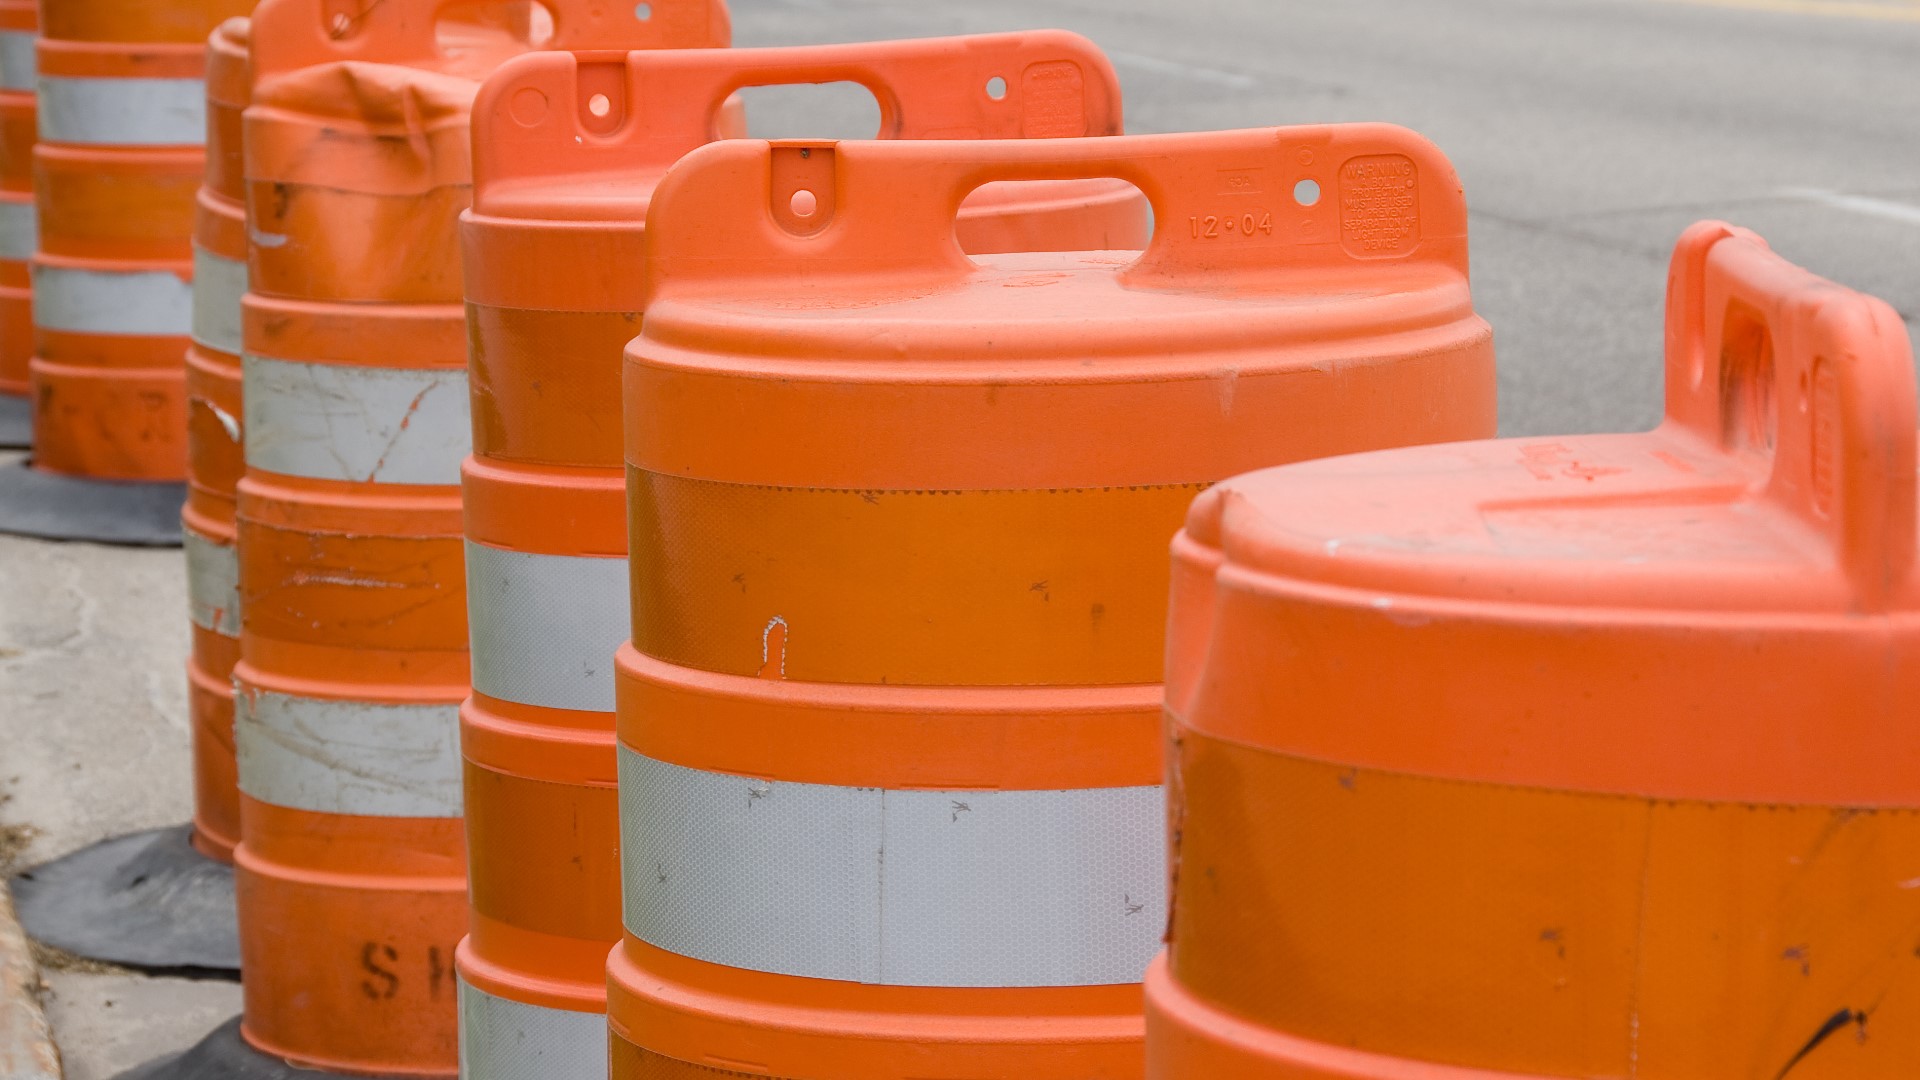 'It’s definitely going to be a busy construction season here in Northeast Ohio,' said ODOT Northeast Ohio Public Information Officer Amanda McFarland.